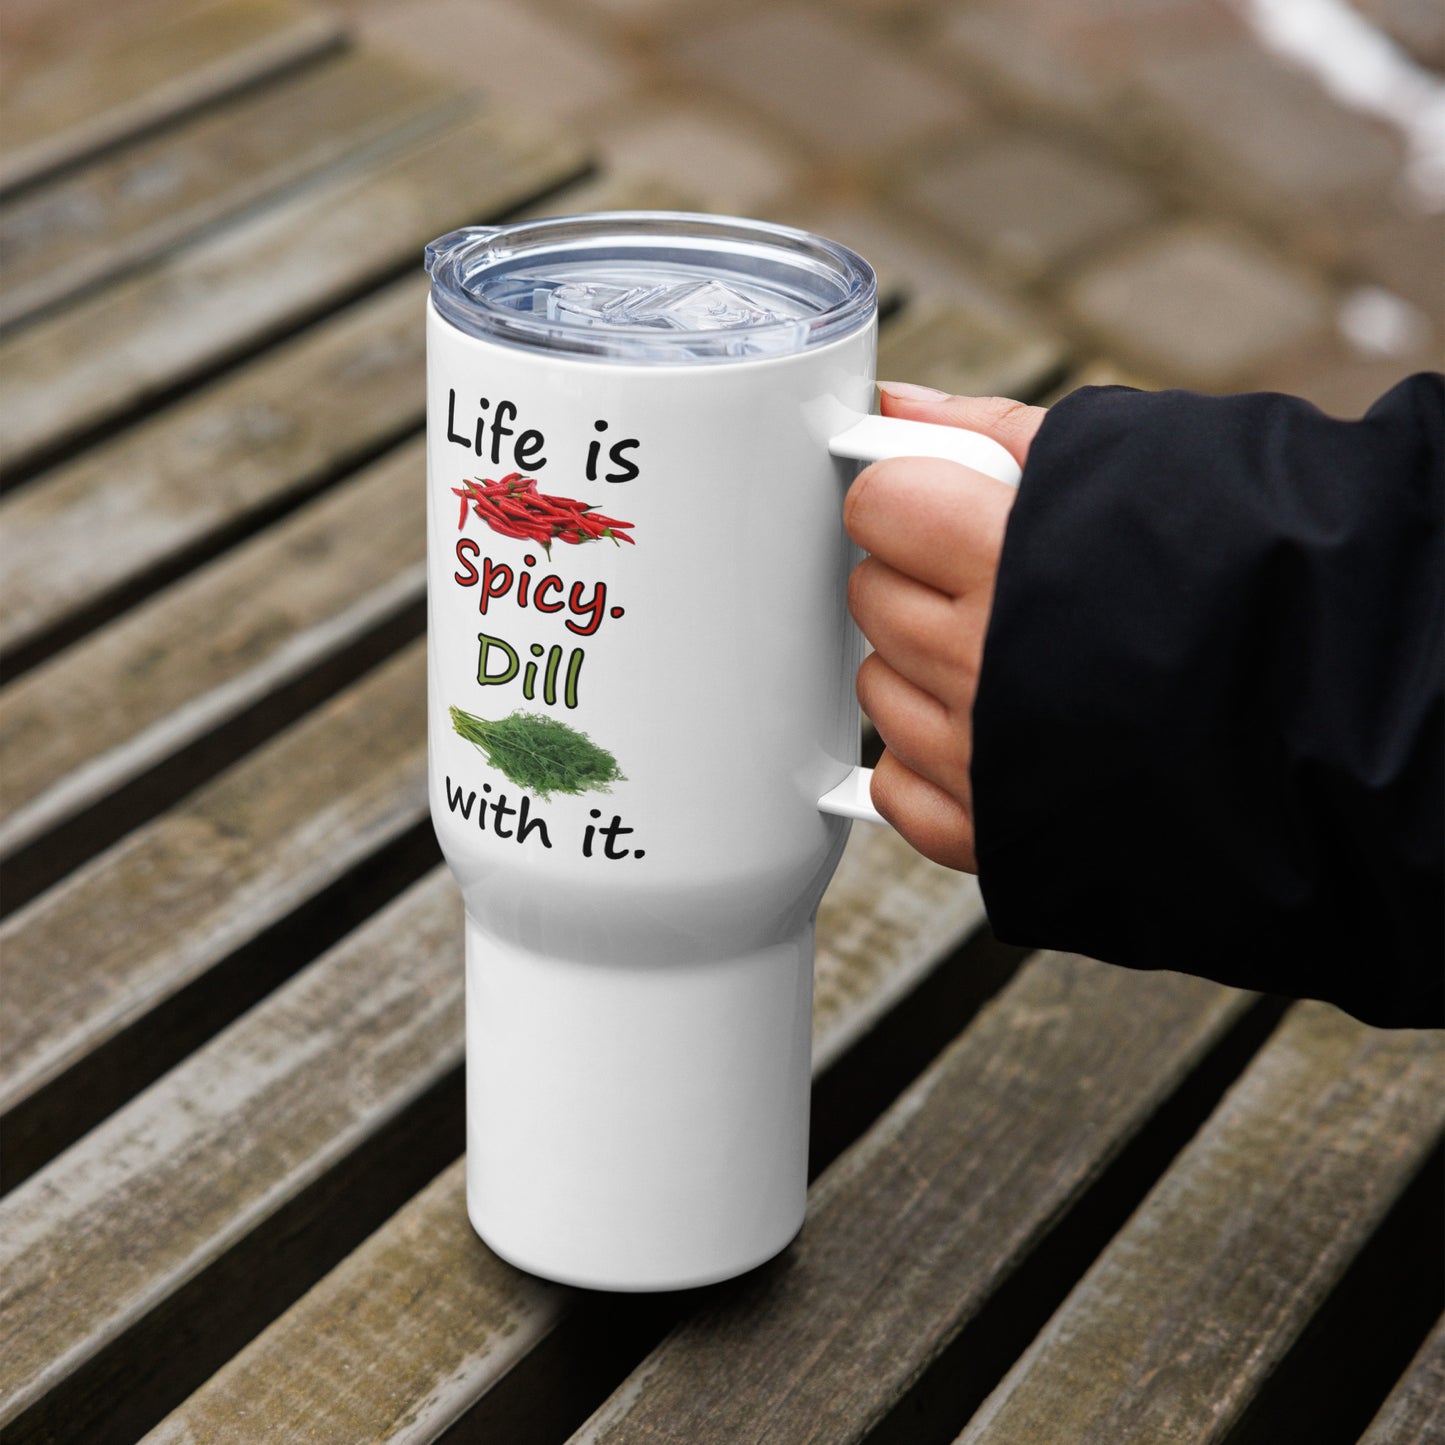 Stainless steel travel mug with handle. Holds 25 ounces of hot or cold liquids. Fits most car cup holders. Features double-sided phrase: Life is spicy. Dill with it, and accompanying chili pepper and dill weed images. Comes with spill proof plastic lid. Shown in model's hand on wooden table.